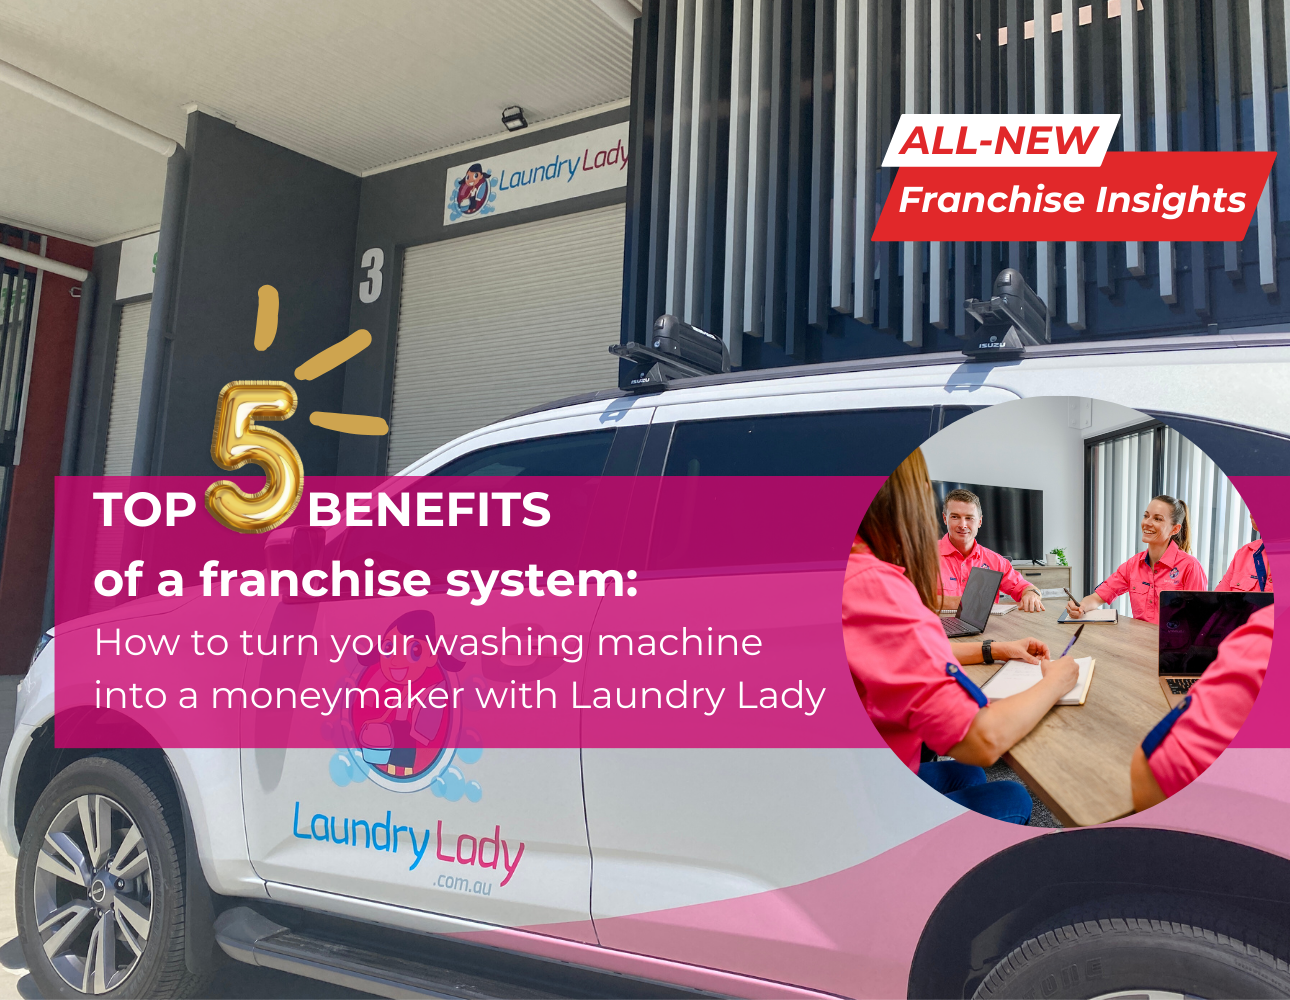 Five benefits of an exclusive franchise model: how you can turn your washing machine into a moneymaker with Laundry Lady